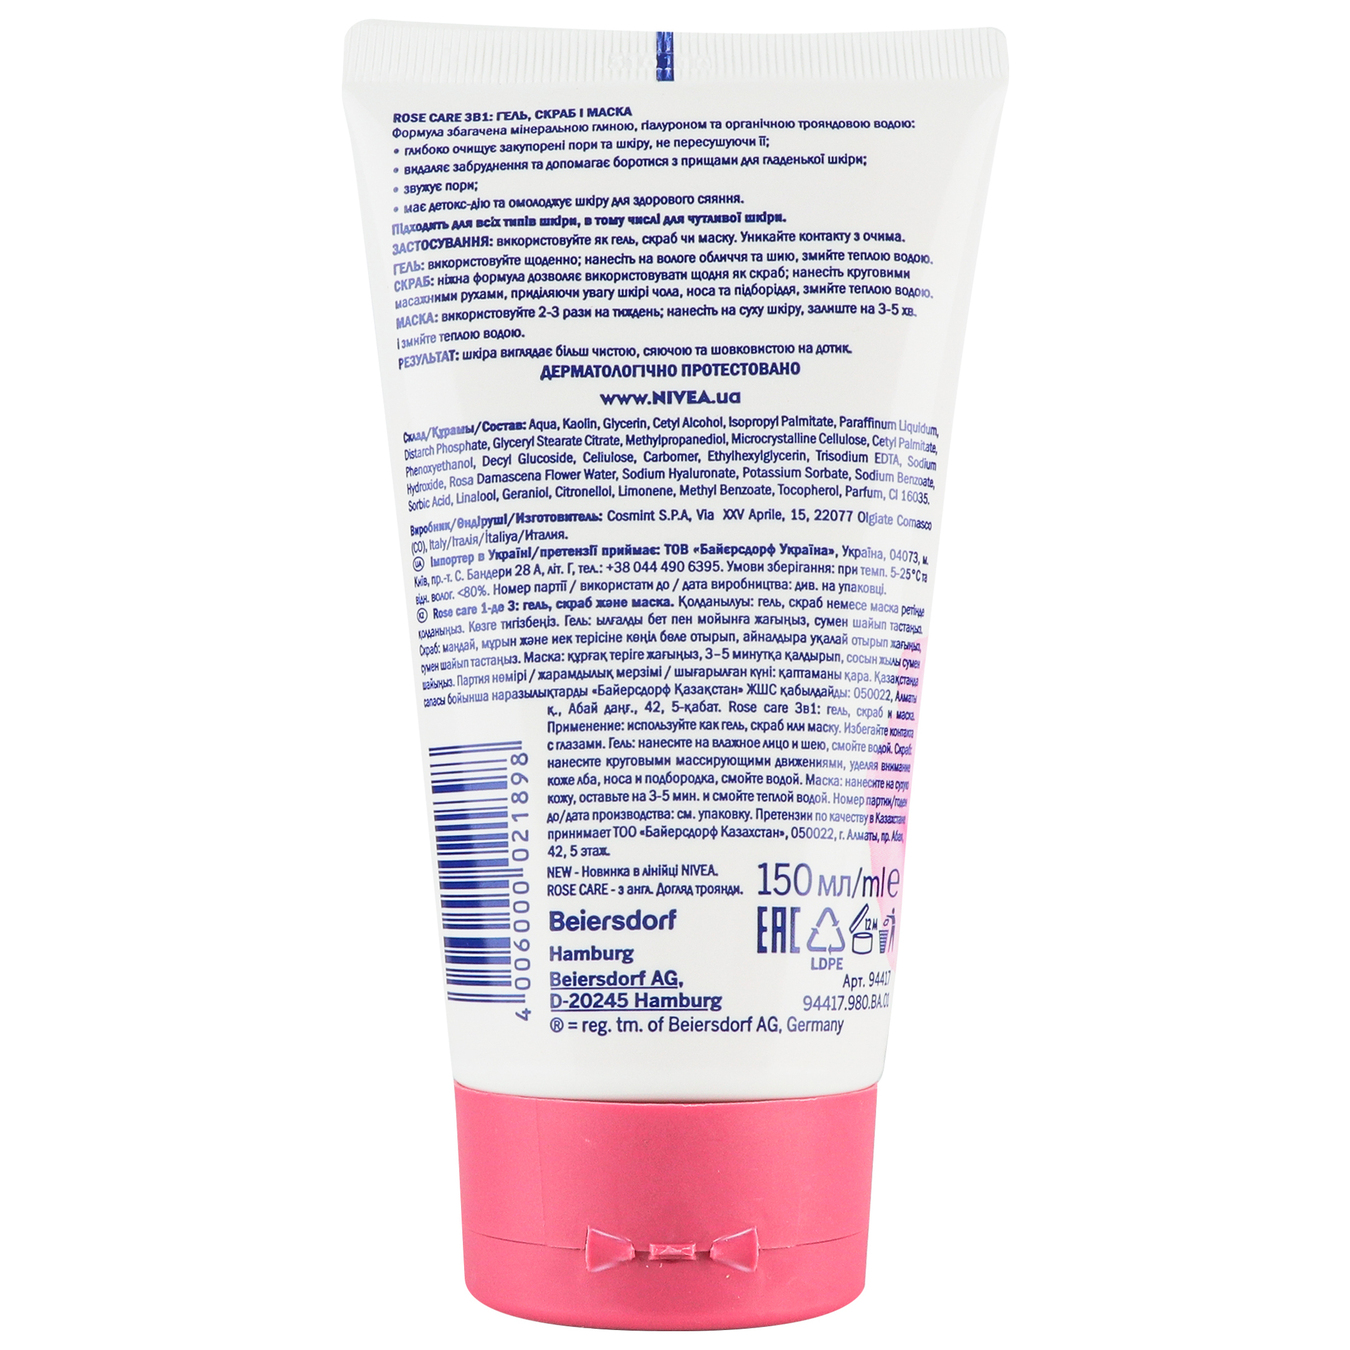 Gel-scrub-mask Nivea 3 in 1 rose care for the face 150 ml 4